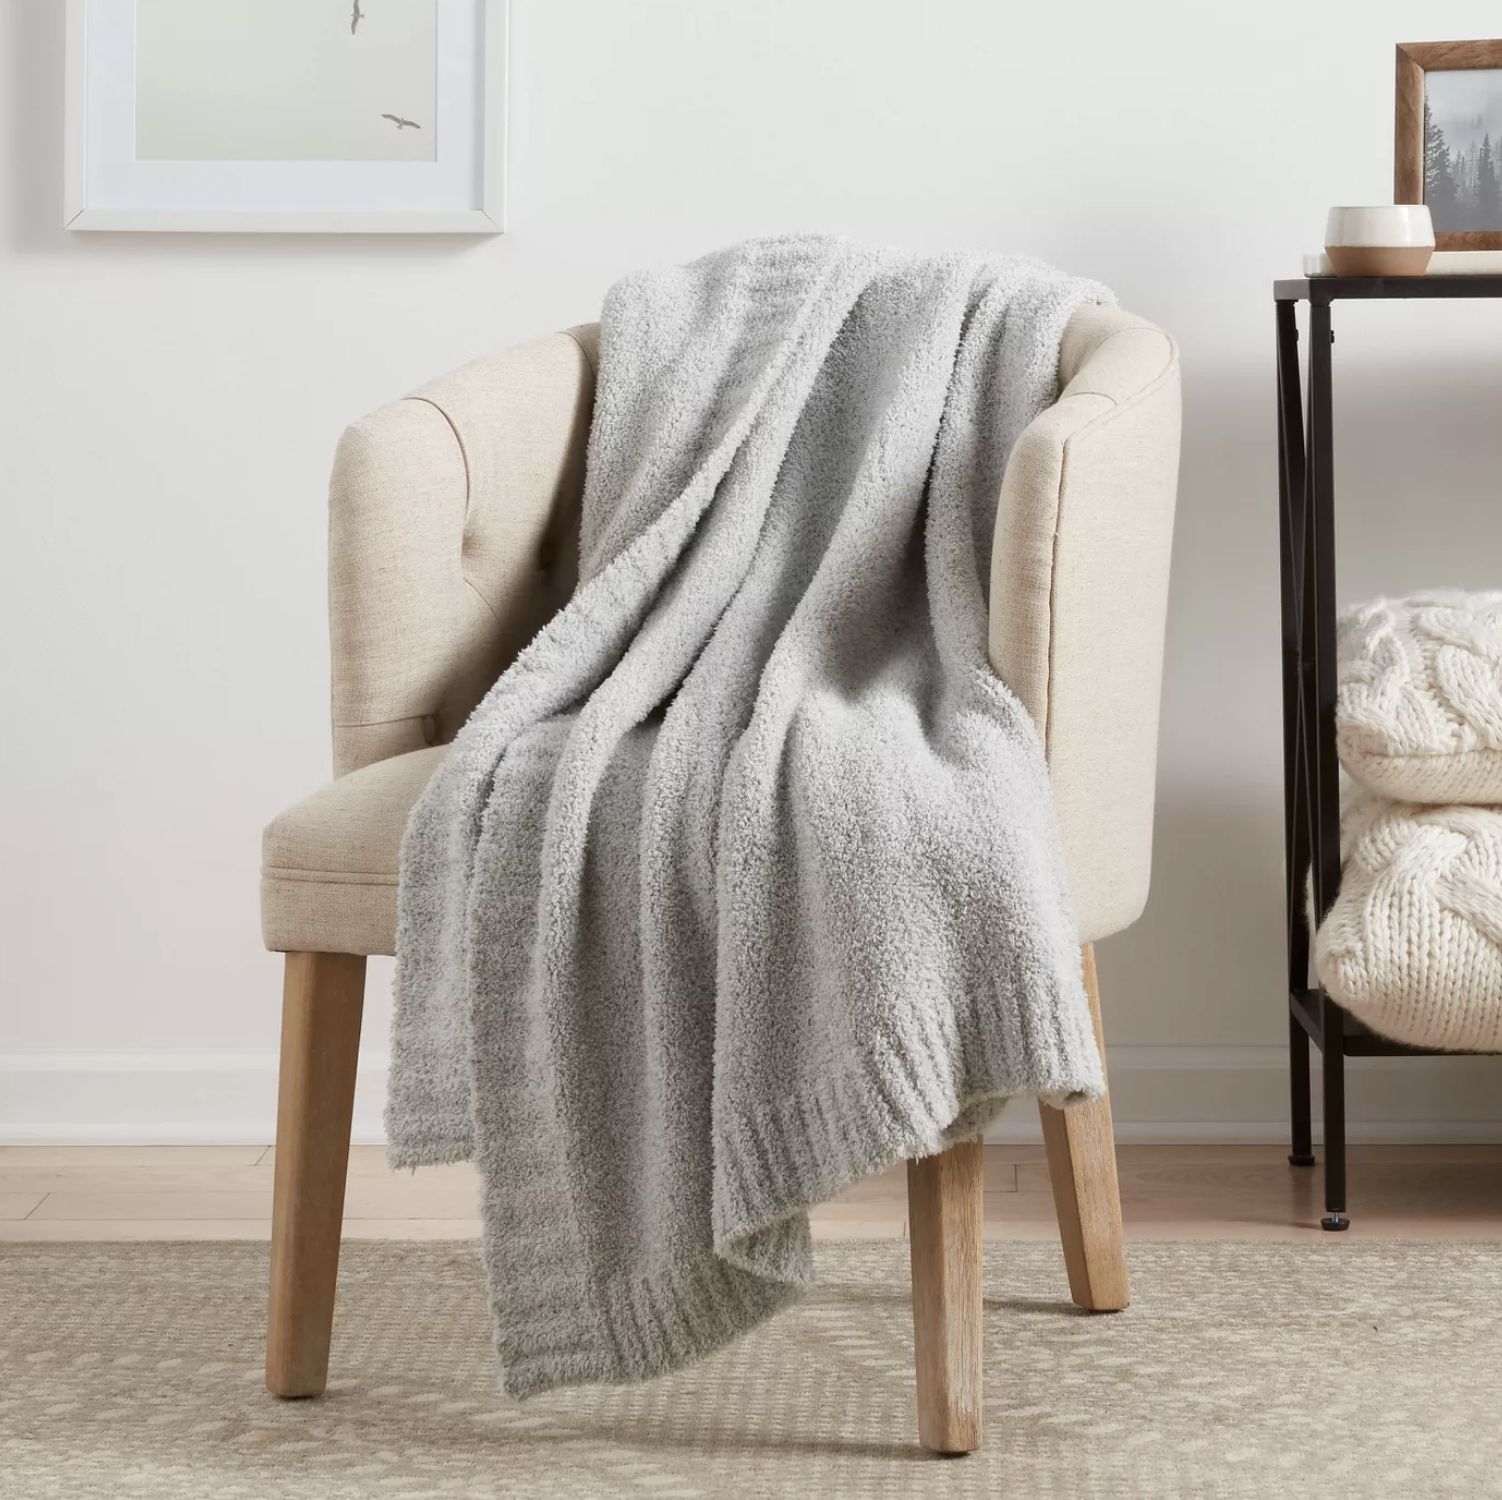 the cozy knit throw in gray